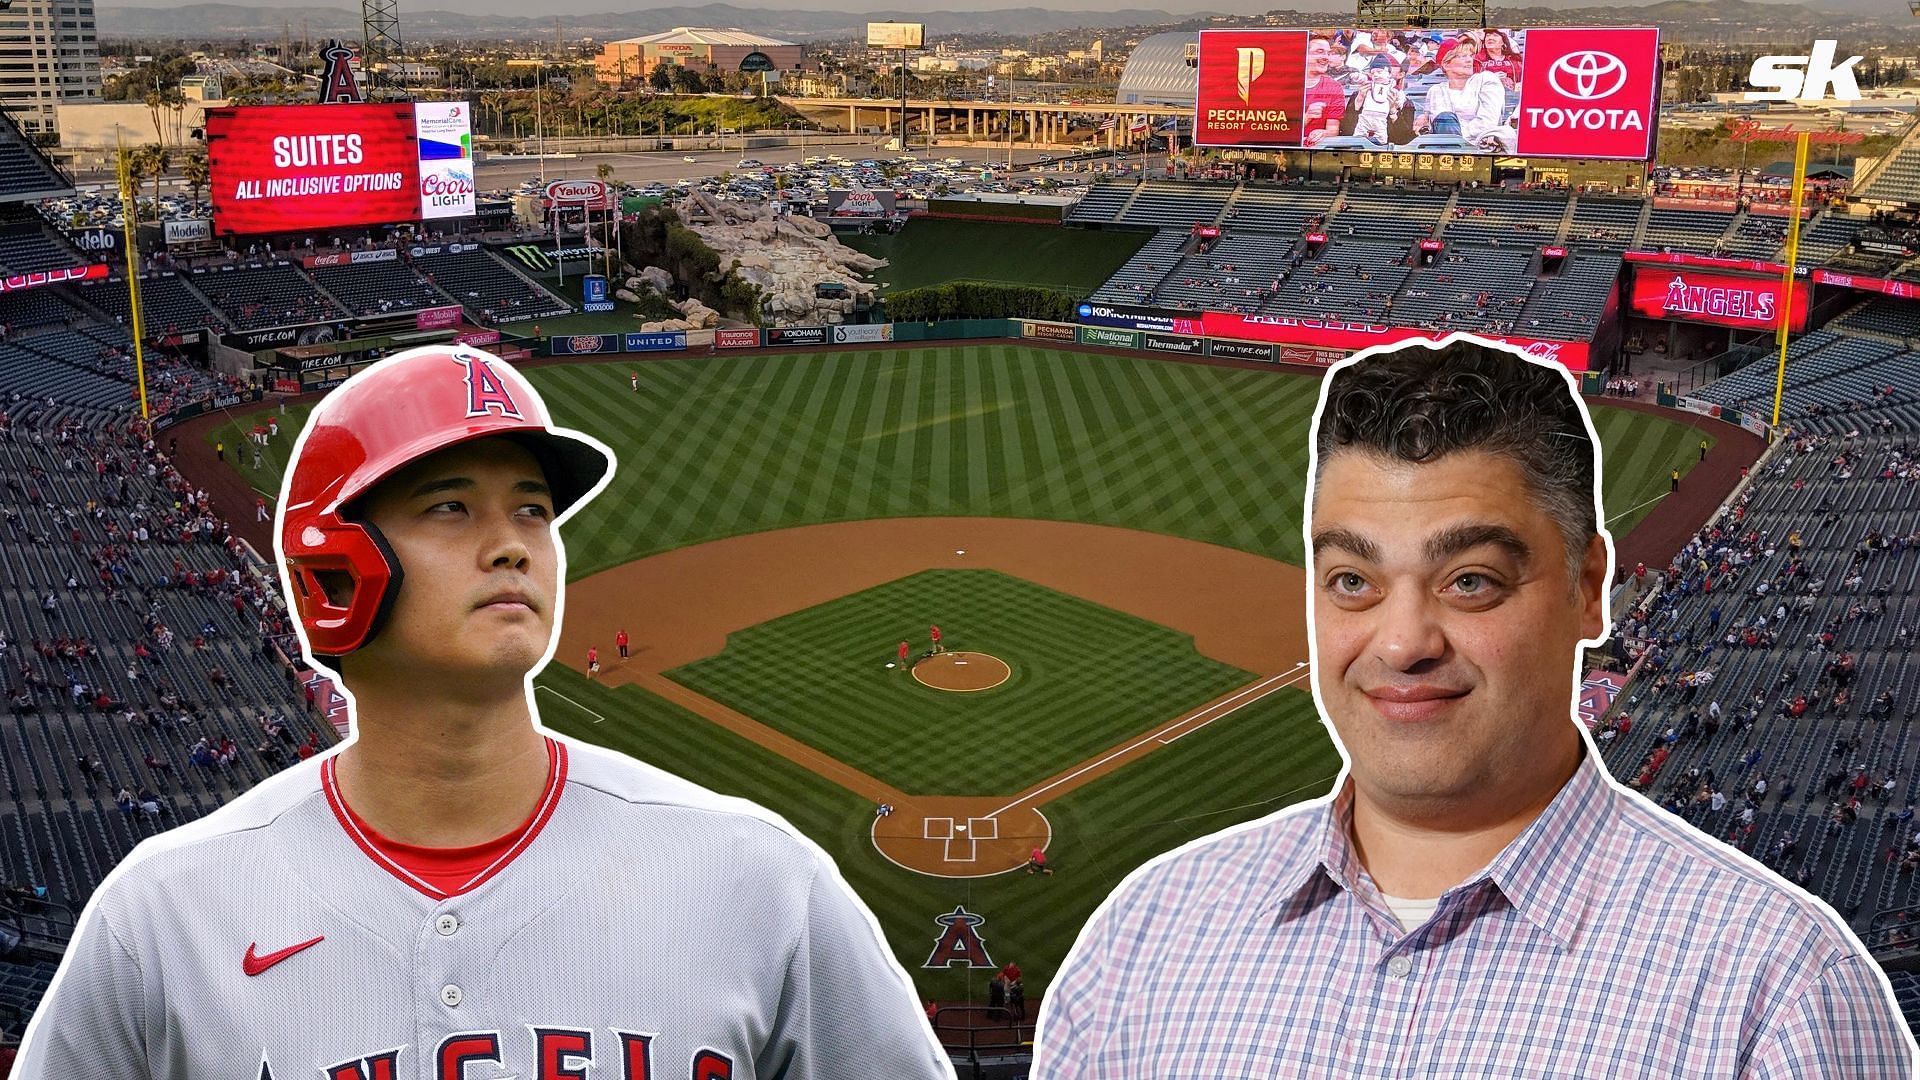 Angels GM Perry Minasian optimistic after meeting with star Shohei Ohtani, believes he could stay with the club